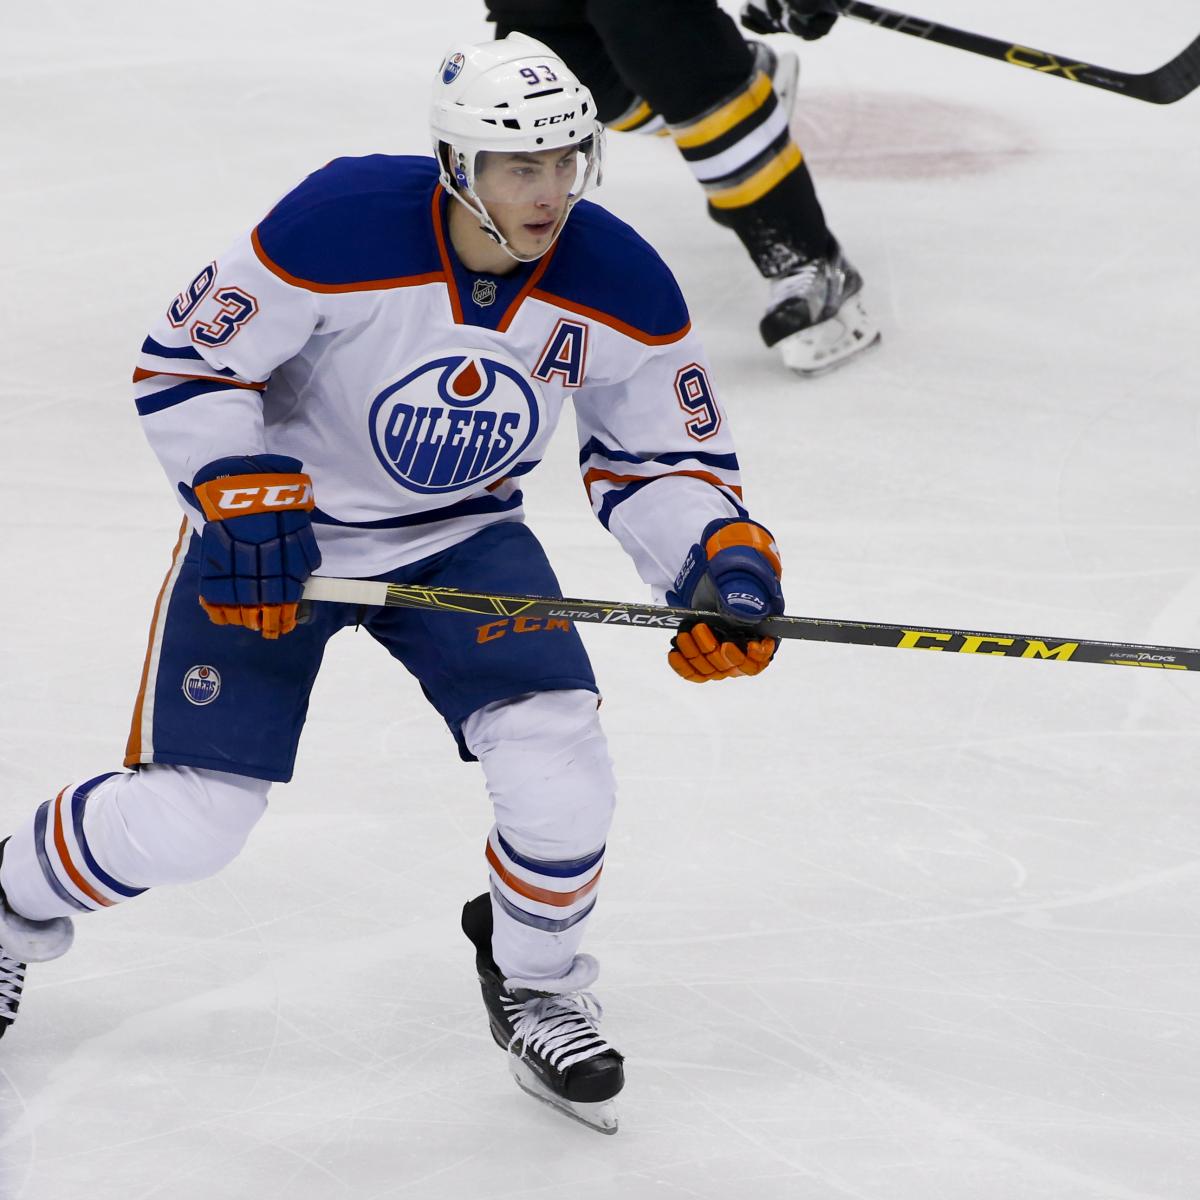 Report: Ryan Nugent-Hopkins, Oilers Agree to New 8-Year, $41M Contract